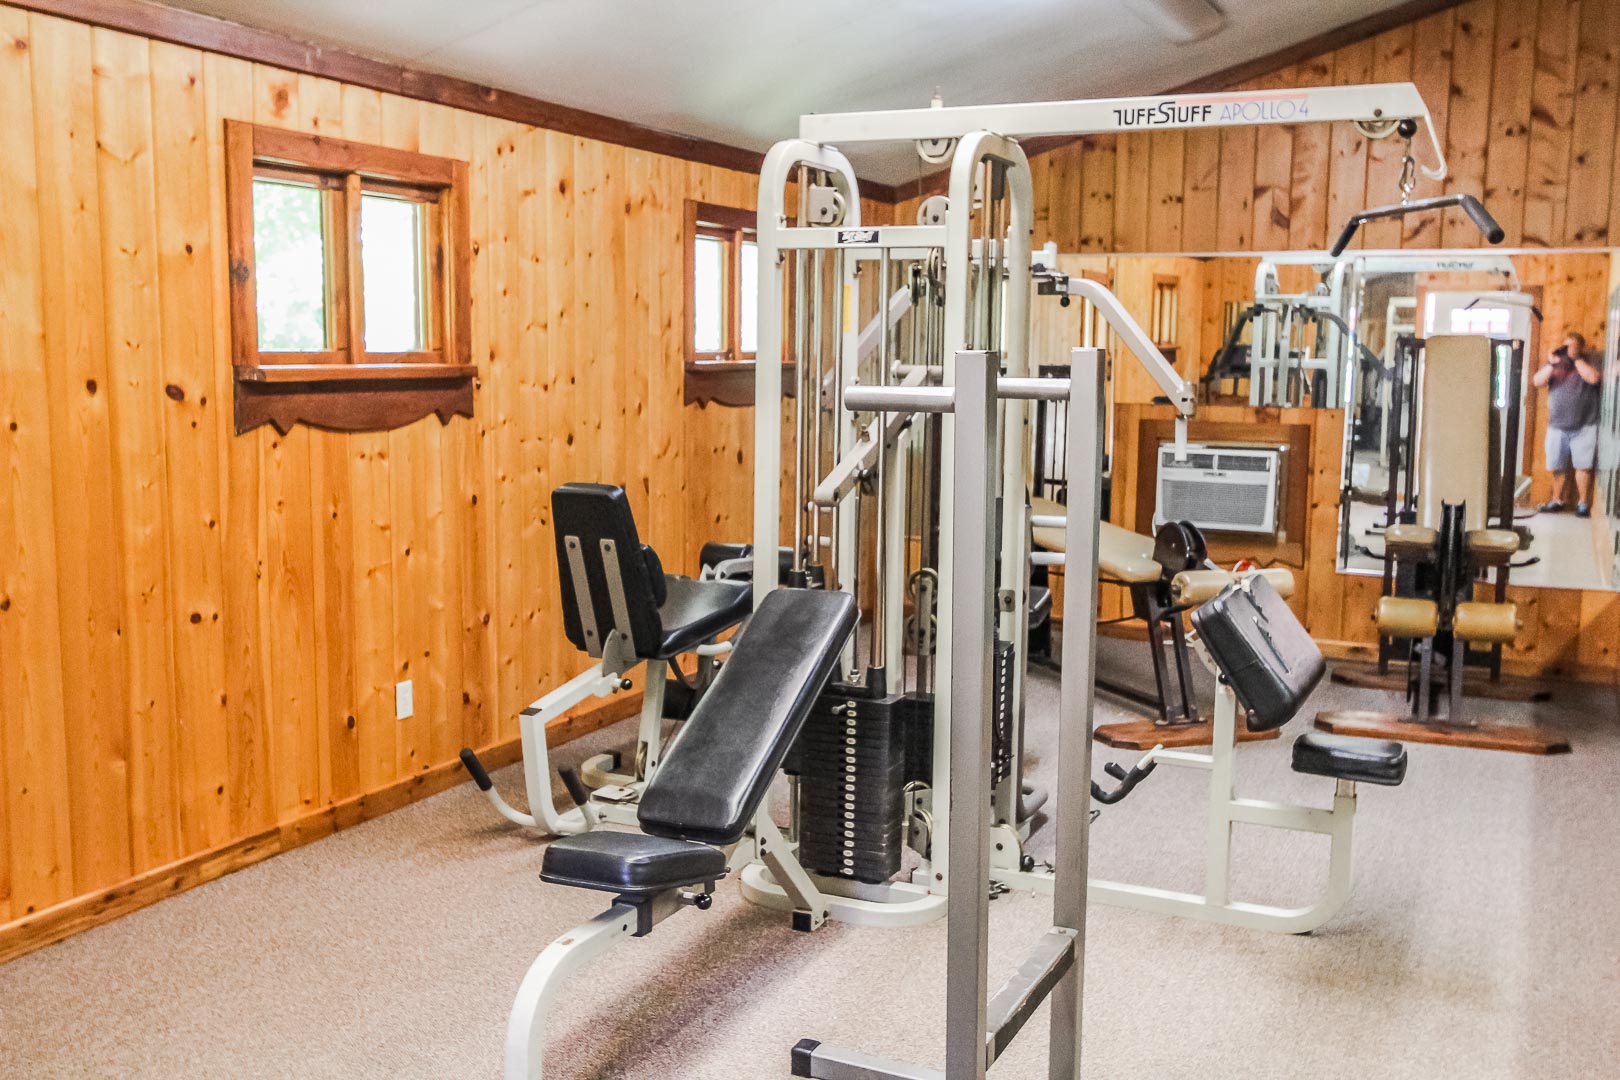 A fully equipped exercise room  at VRI's Alpine Crest Resort in Georgia.